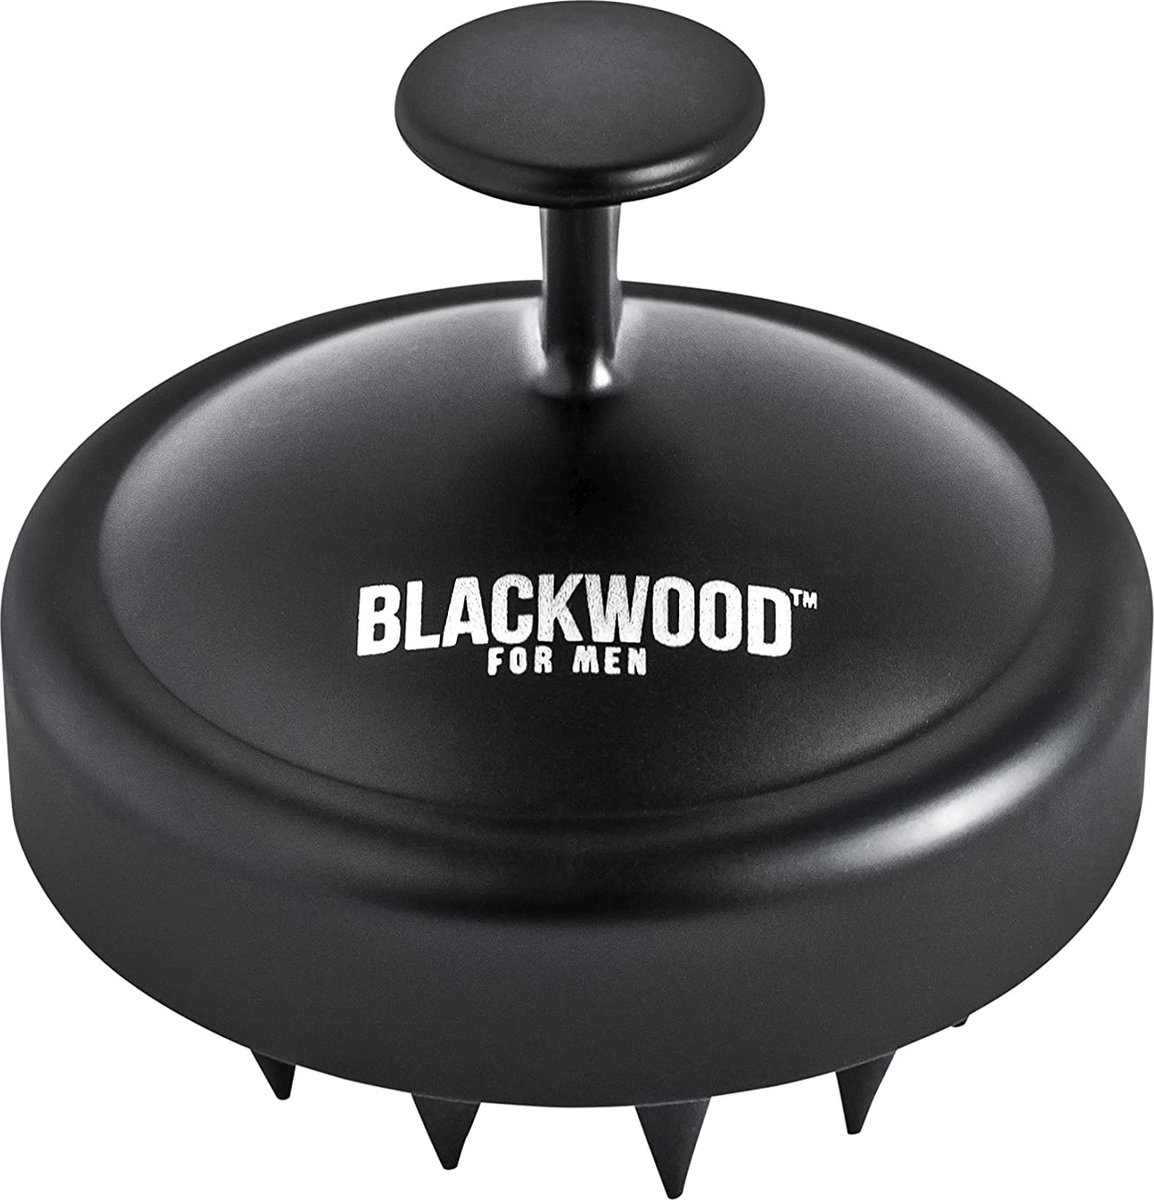 Blackwood Scalp Salvation Massager to Boost Men's Hair Growth, Reduce Dandruff Flakes and Soothe Inflammation